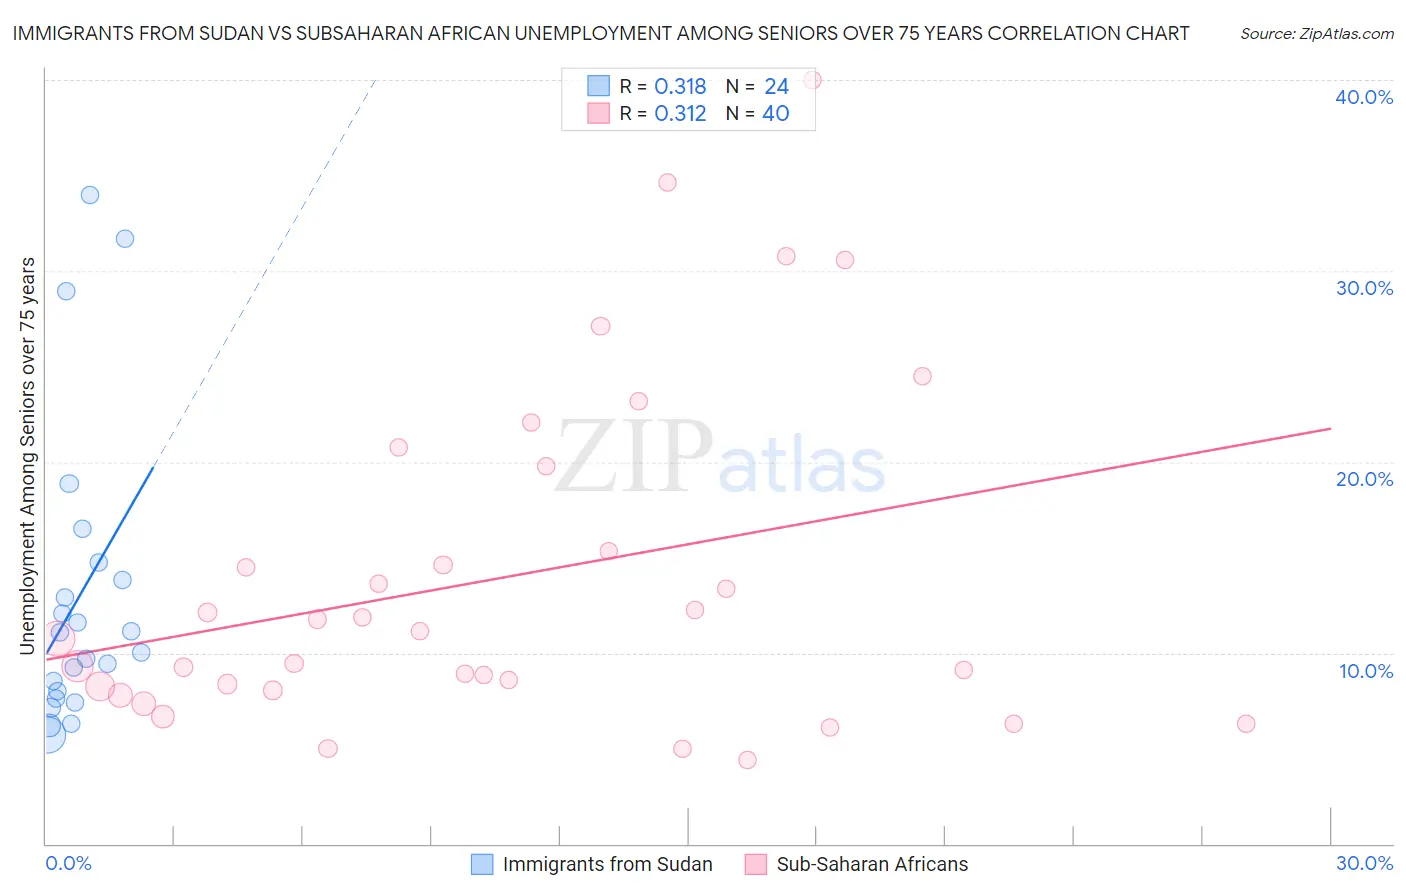 Immigrants from Sudan vs Subsaharan African Unemployment Among Seniors over 75 years